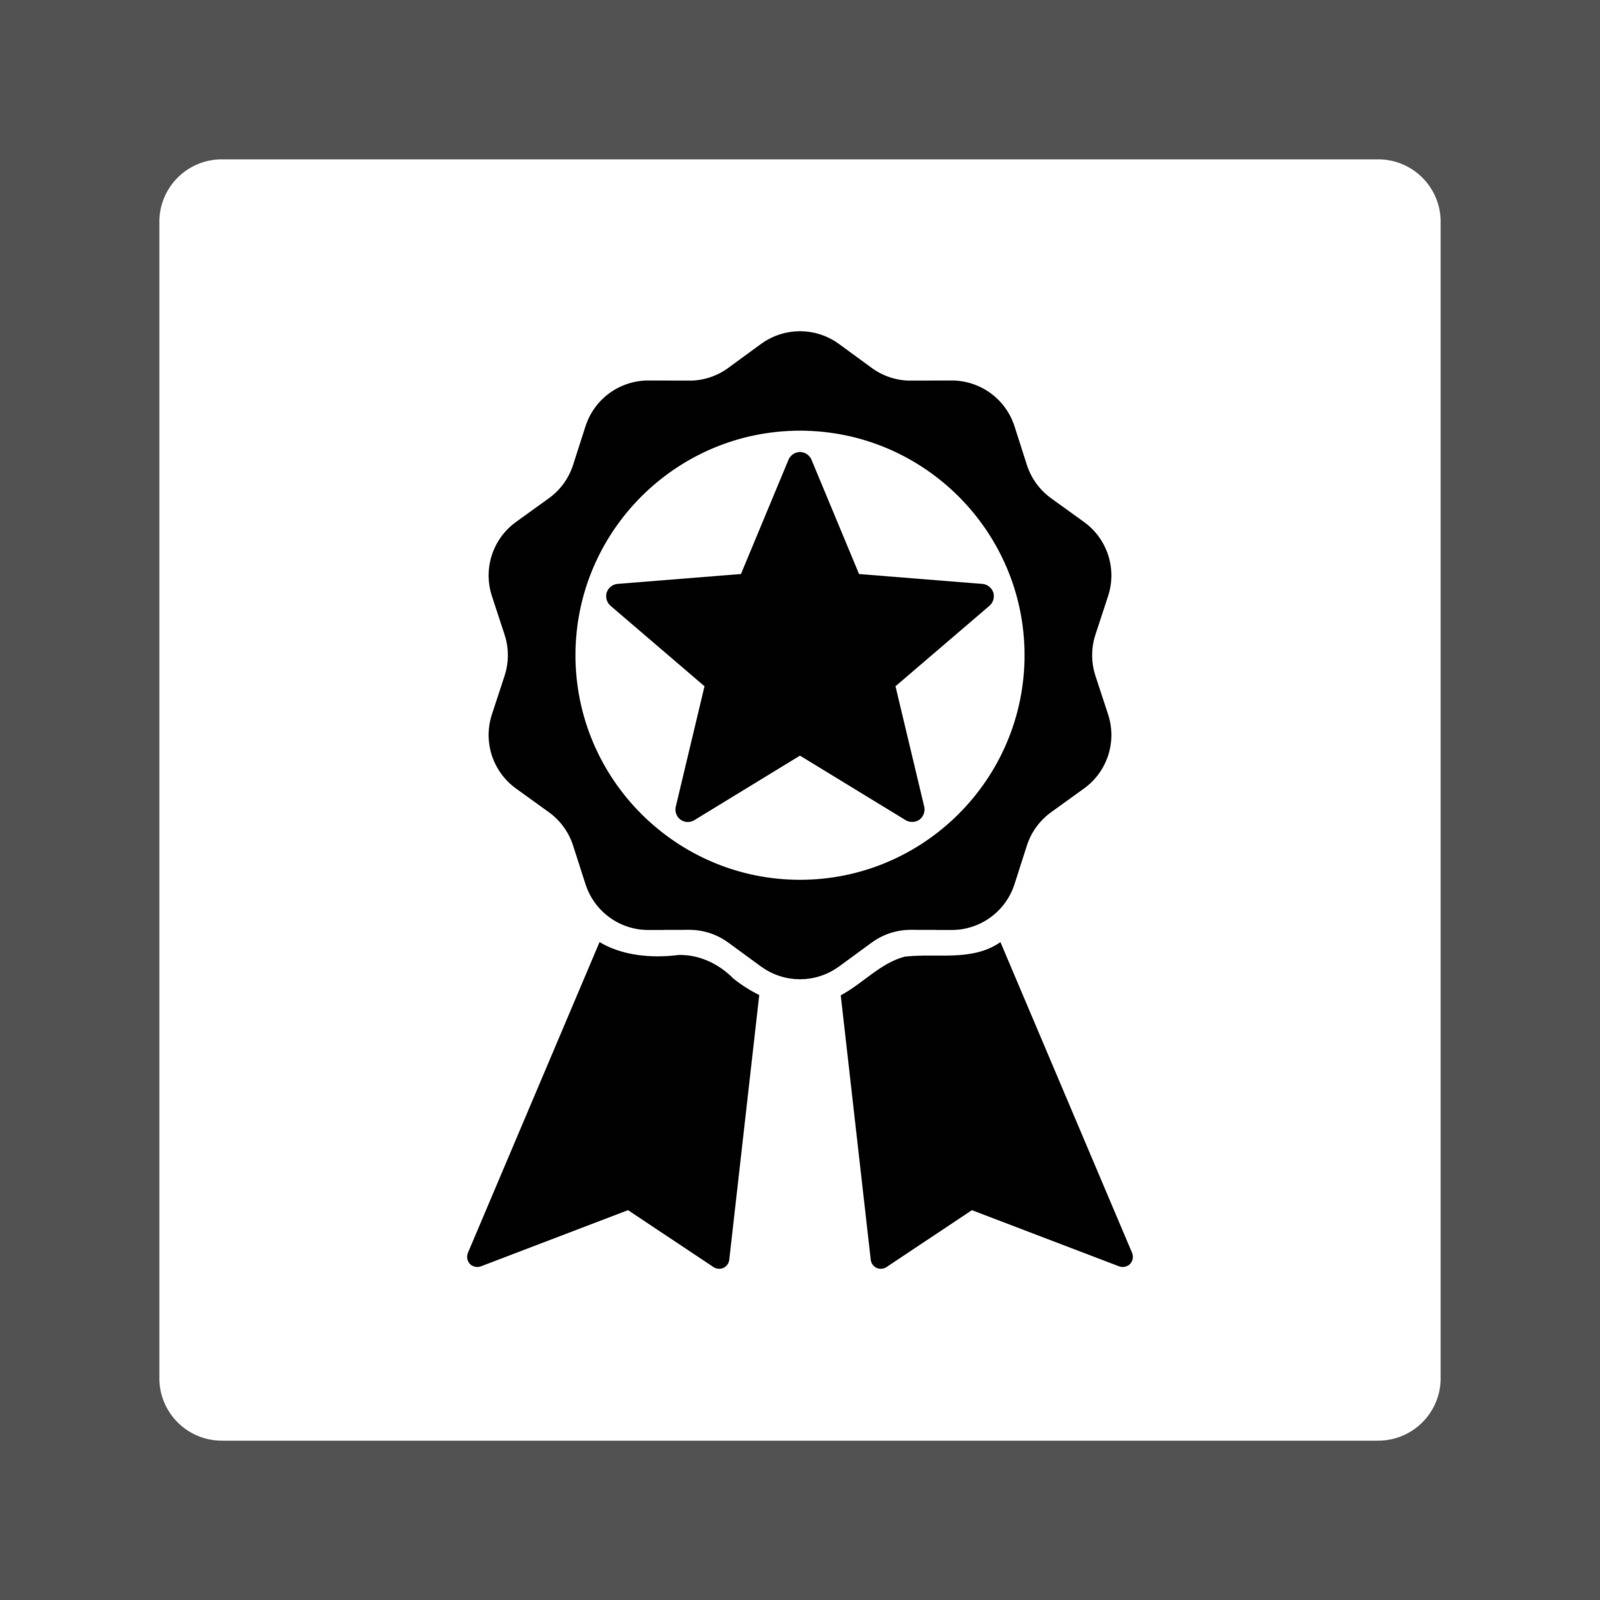 Award icon from Award Buttons OverColor Set by ahasoft